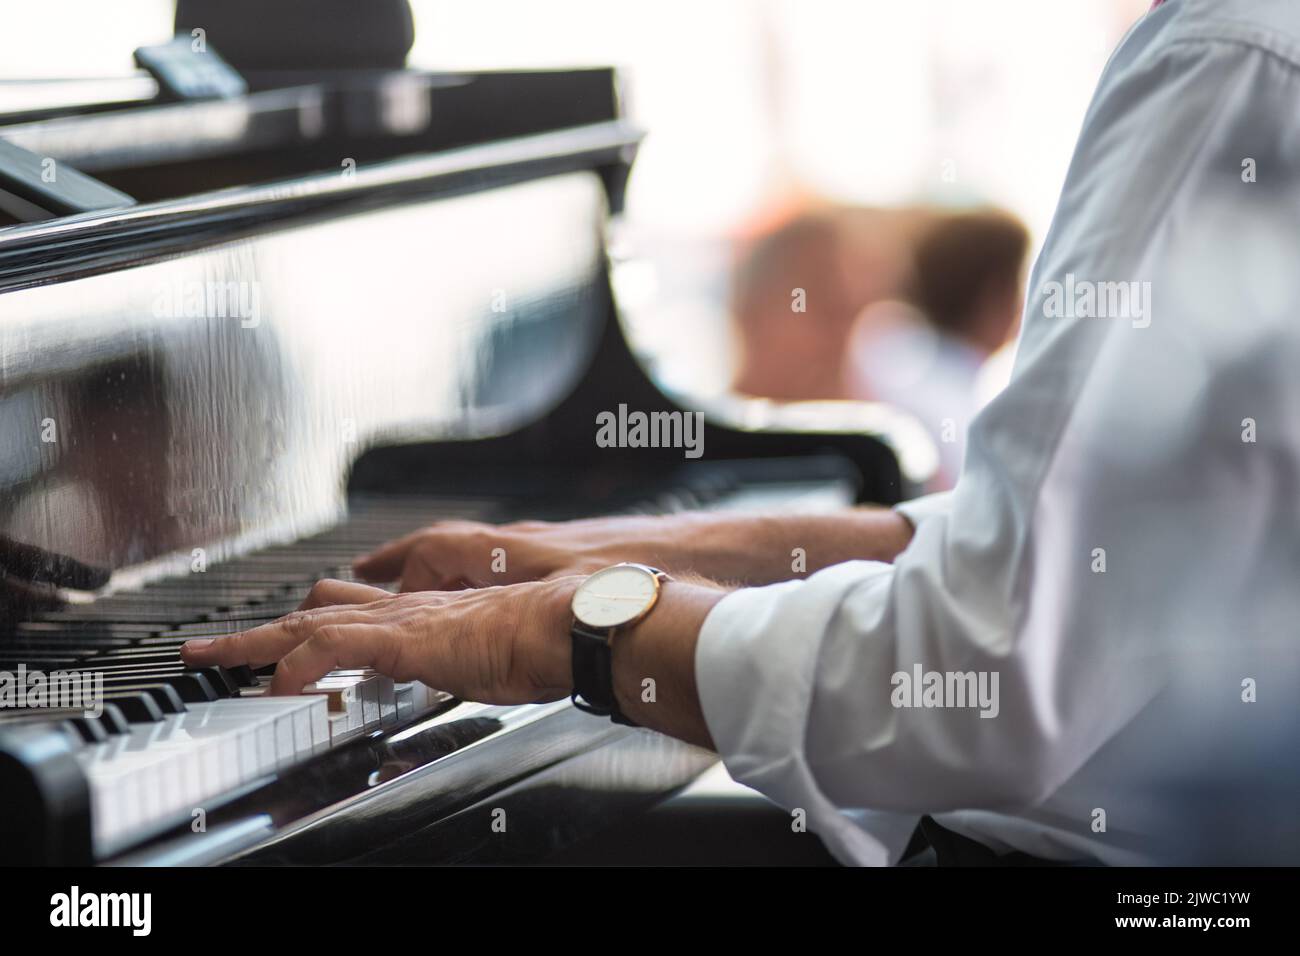 Detachment of a pianist's hands on the keyboard during a performance Stock Photo